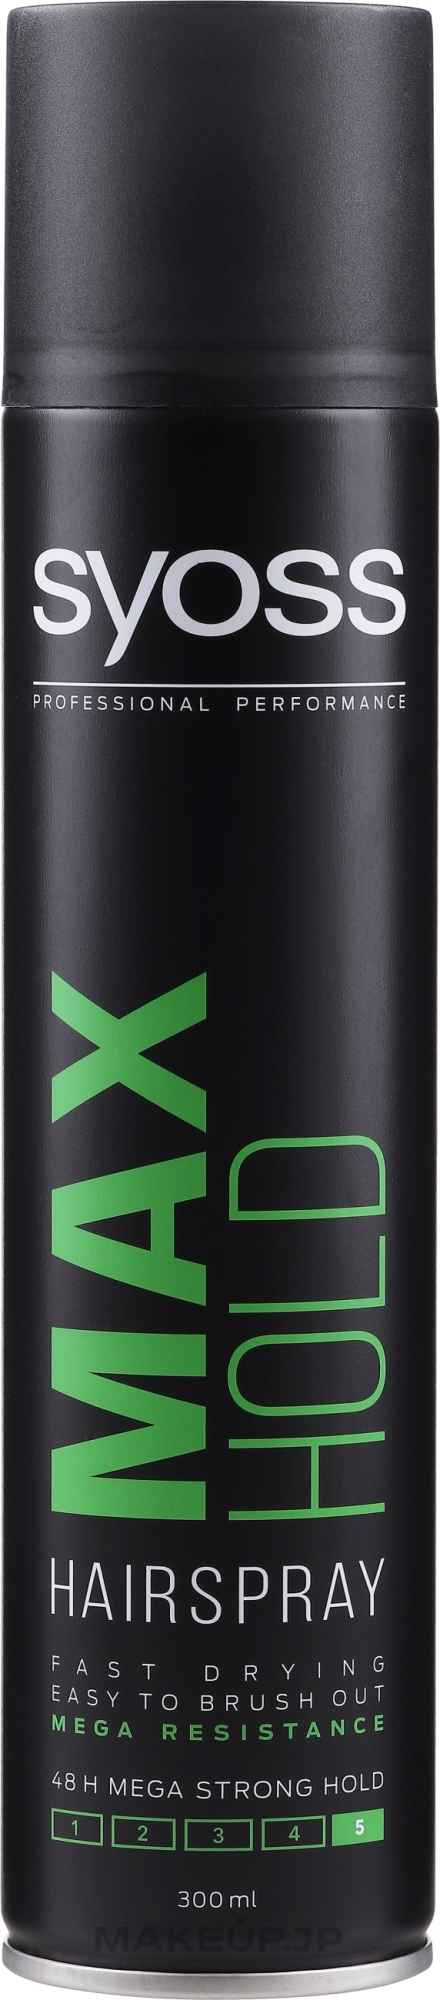 48H Maximum Strong Hold Hair Spray "Max Hold" - Syoss Styling Max Hold — photo 300 ml